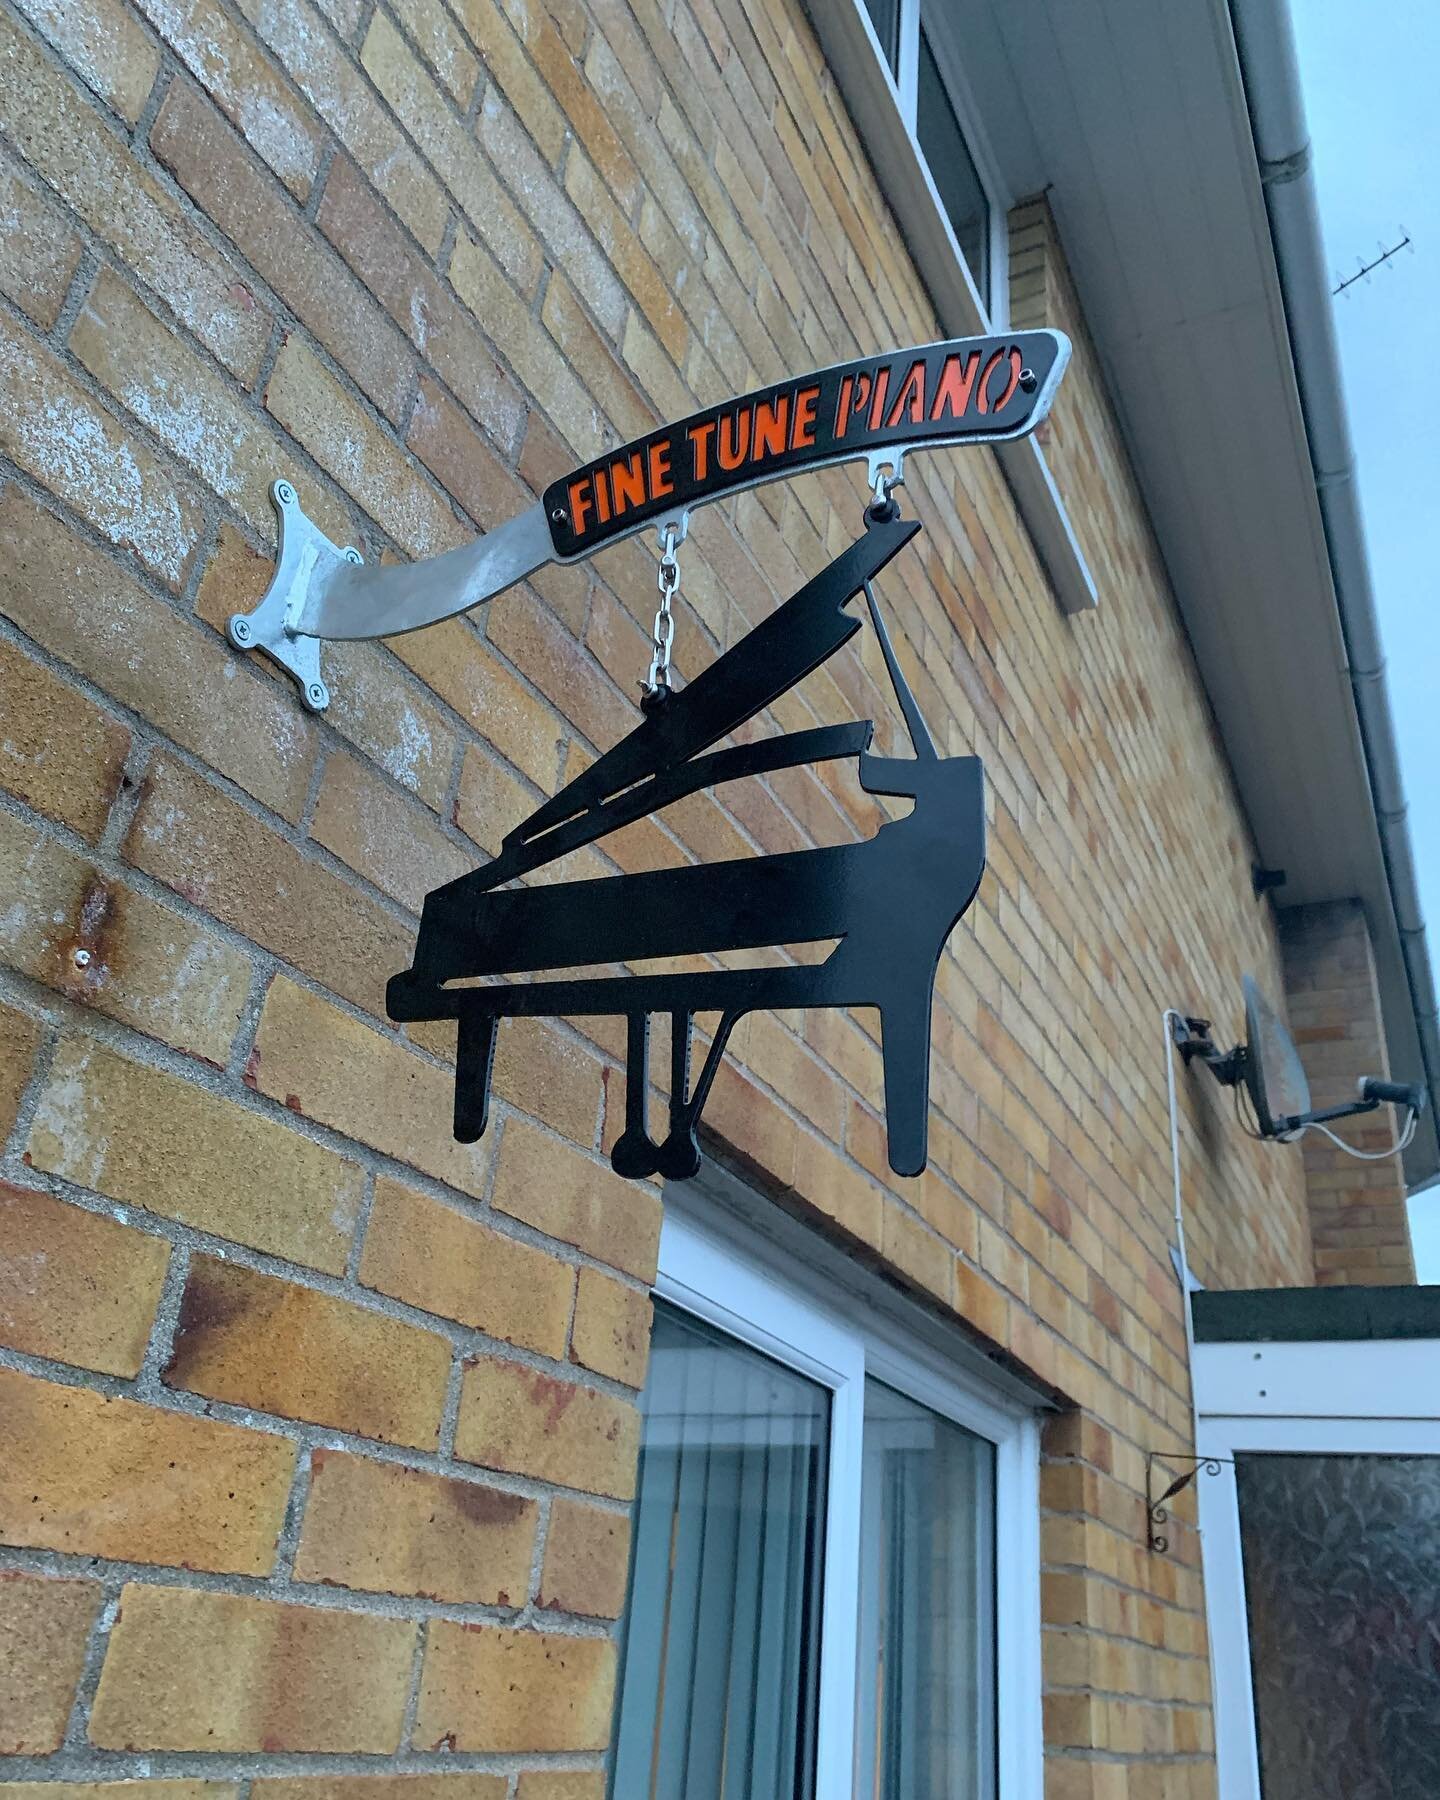 New sign for my house/shop&hellip; made by Creative Metal Art of Tenby. Great service from those guys&hellip;bespoke signs made to order. Many thanks to them. Creative Metal Art

https://creative-metal-art.co.uk